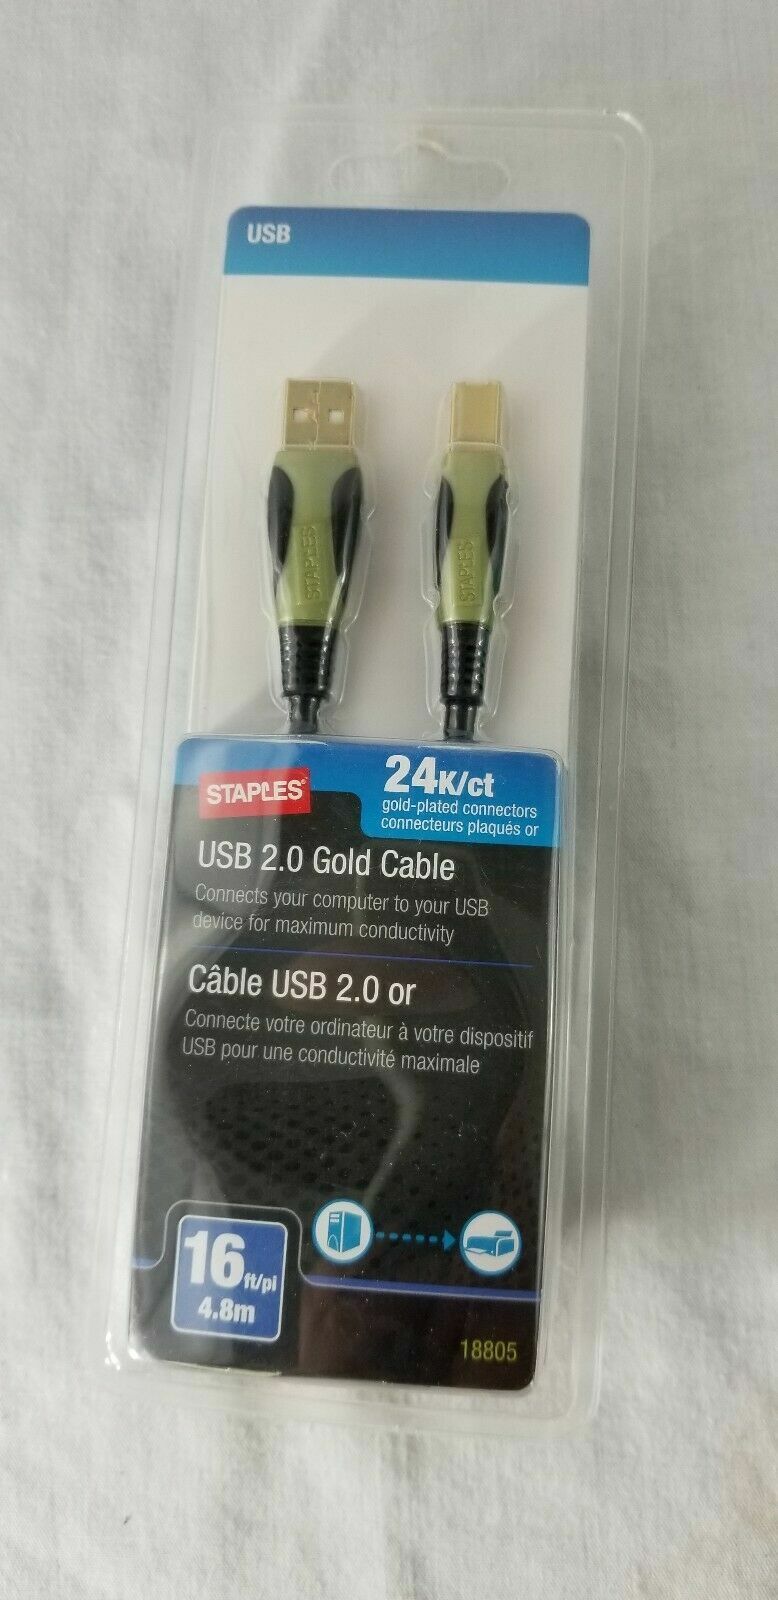 New Sealed Staples 24K Gold Plated USB 2.0 Gold Cable 16ft